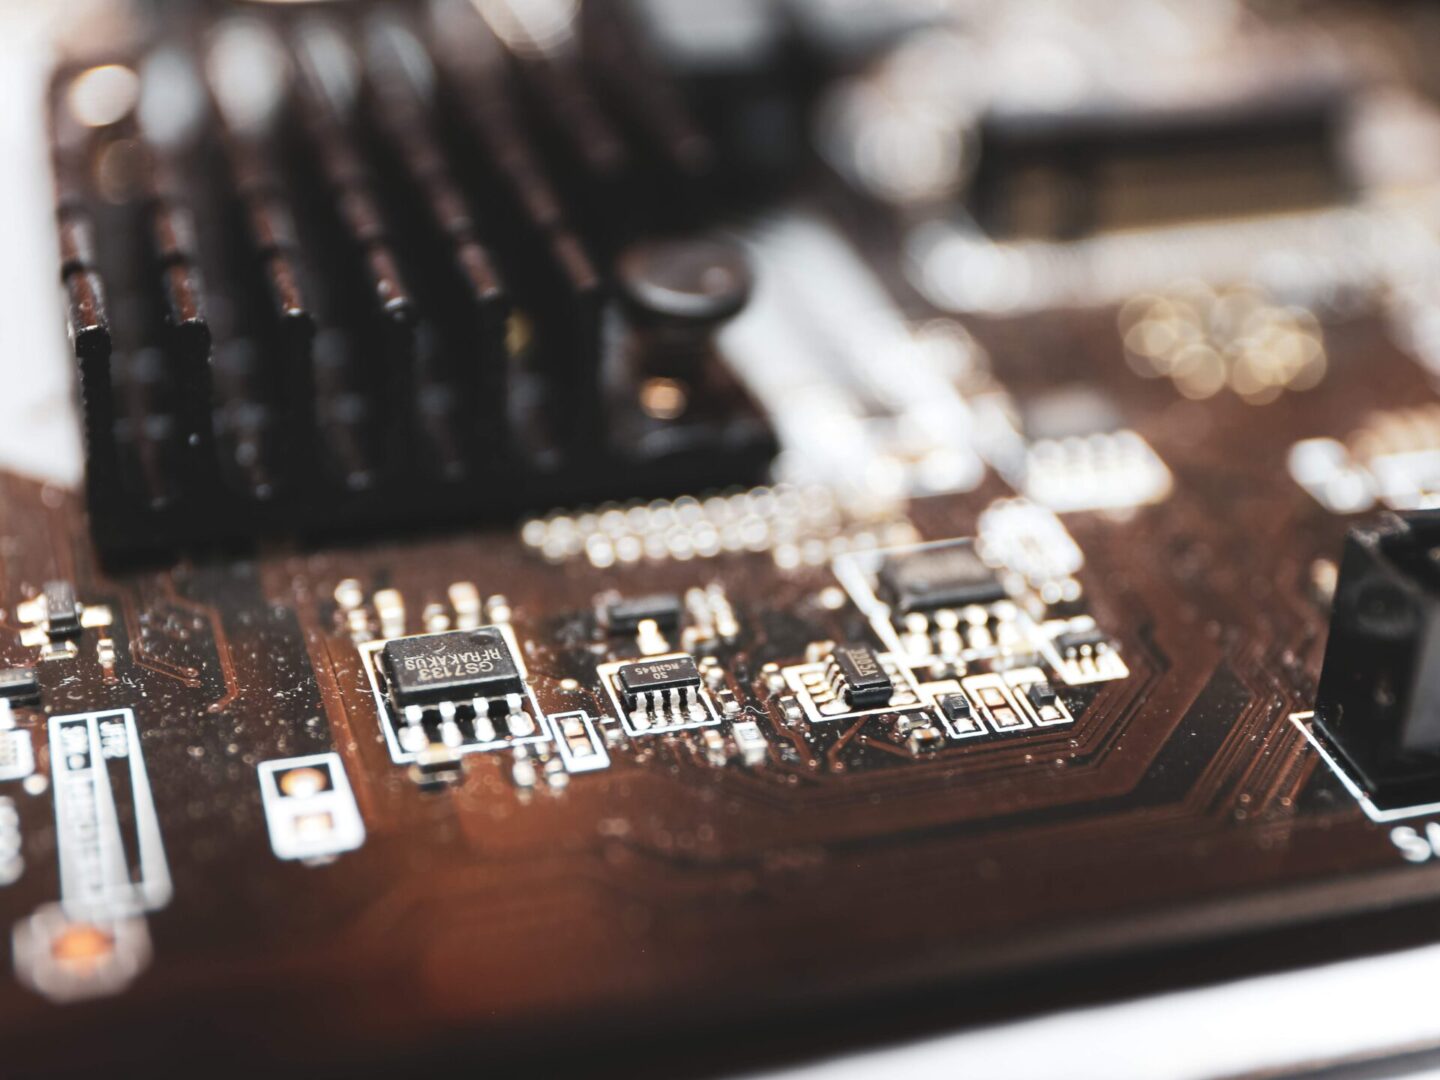 A close up of the electronic components on a computer.